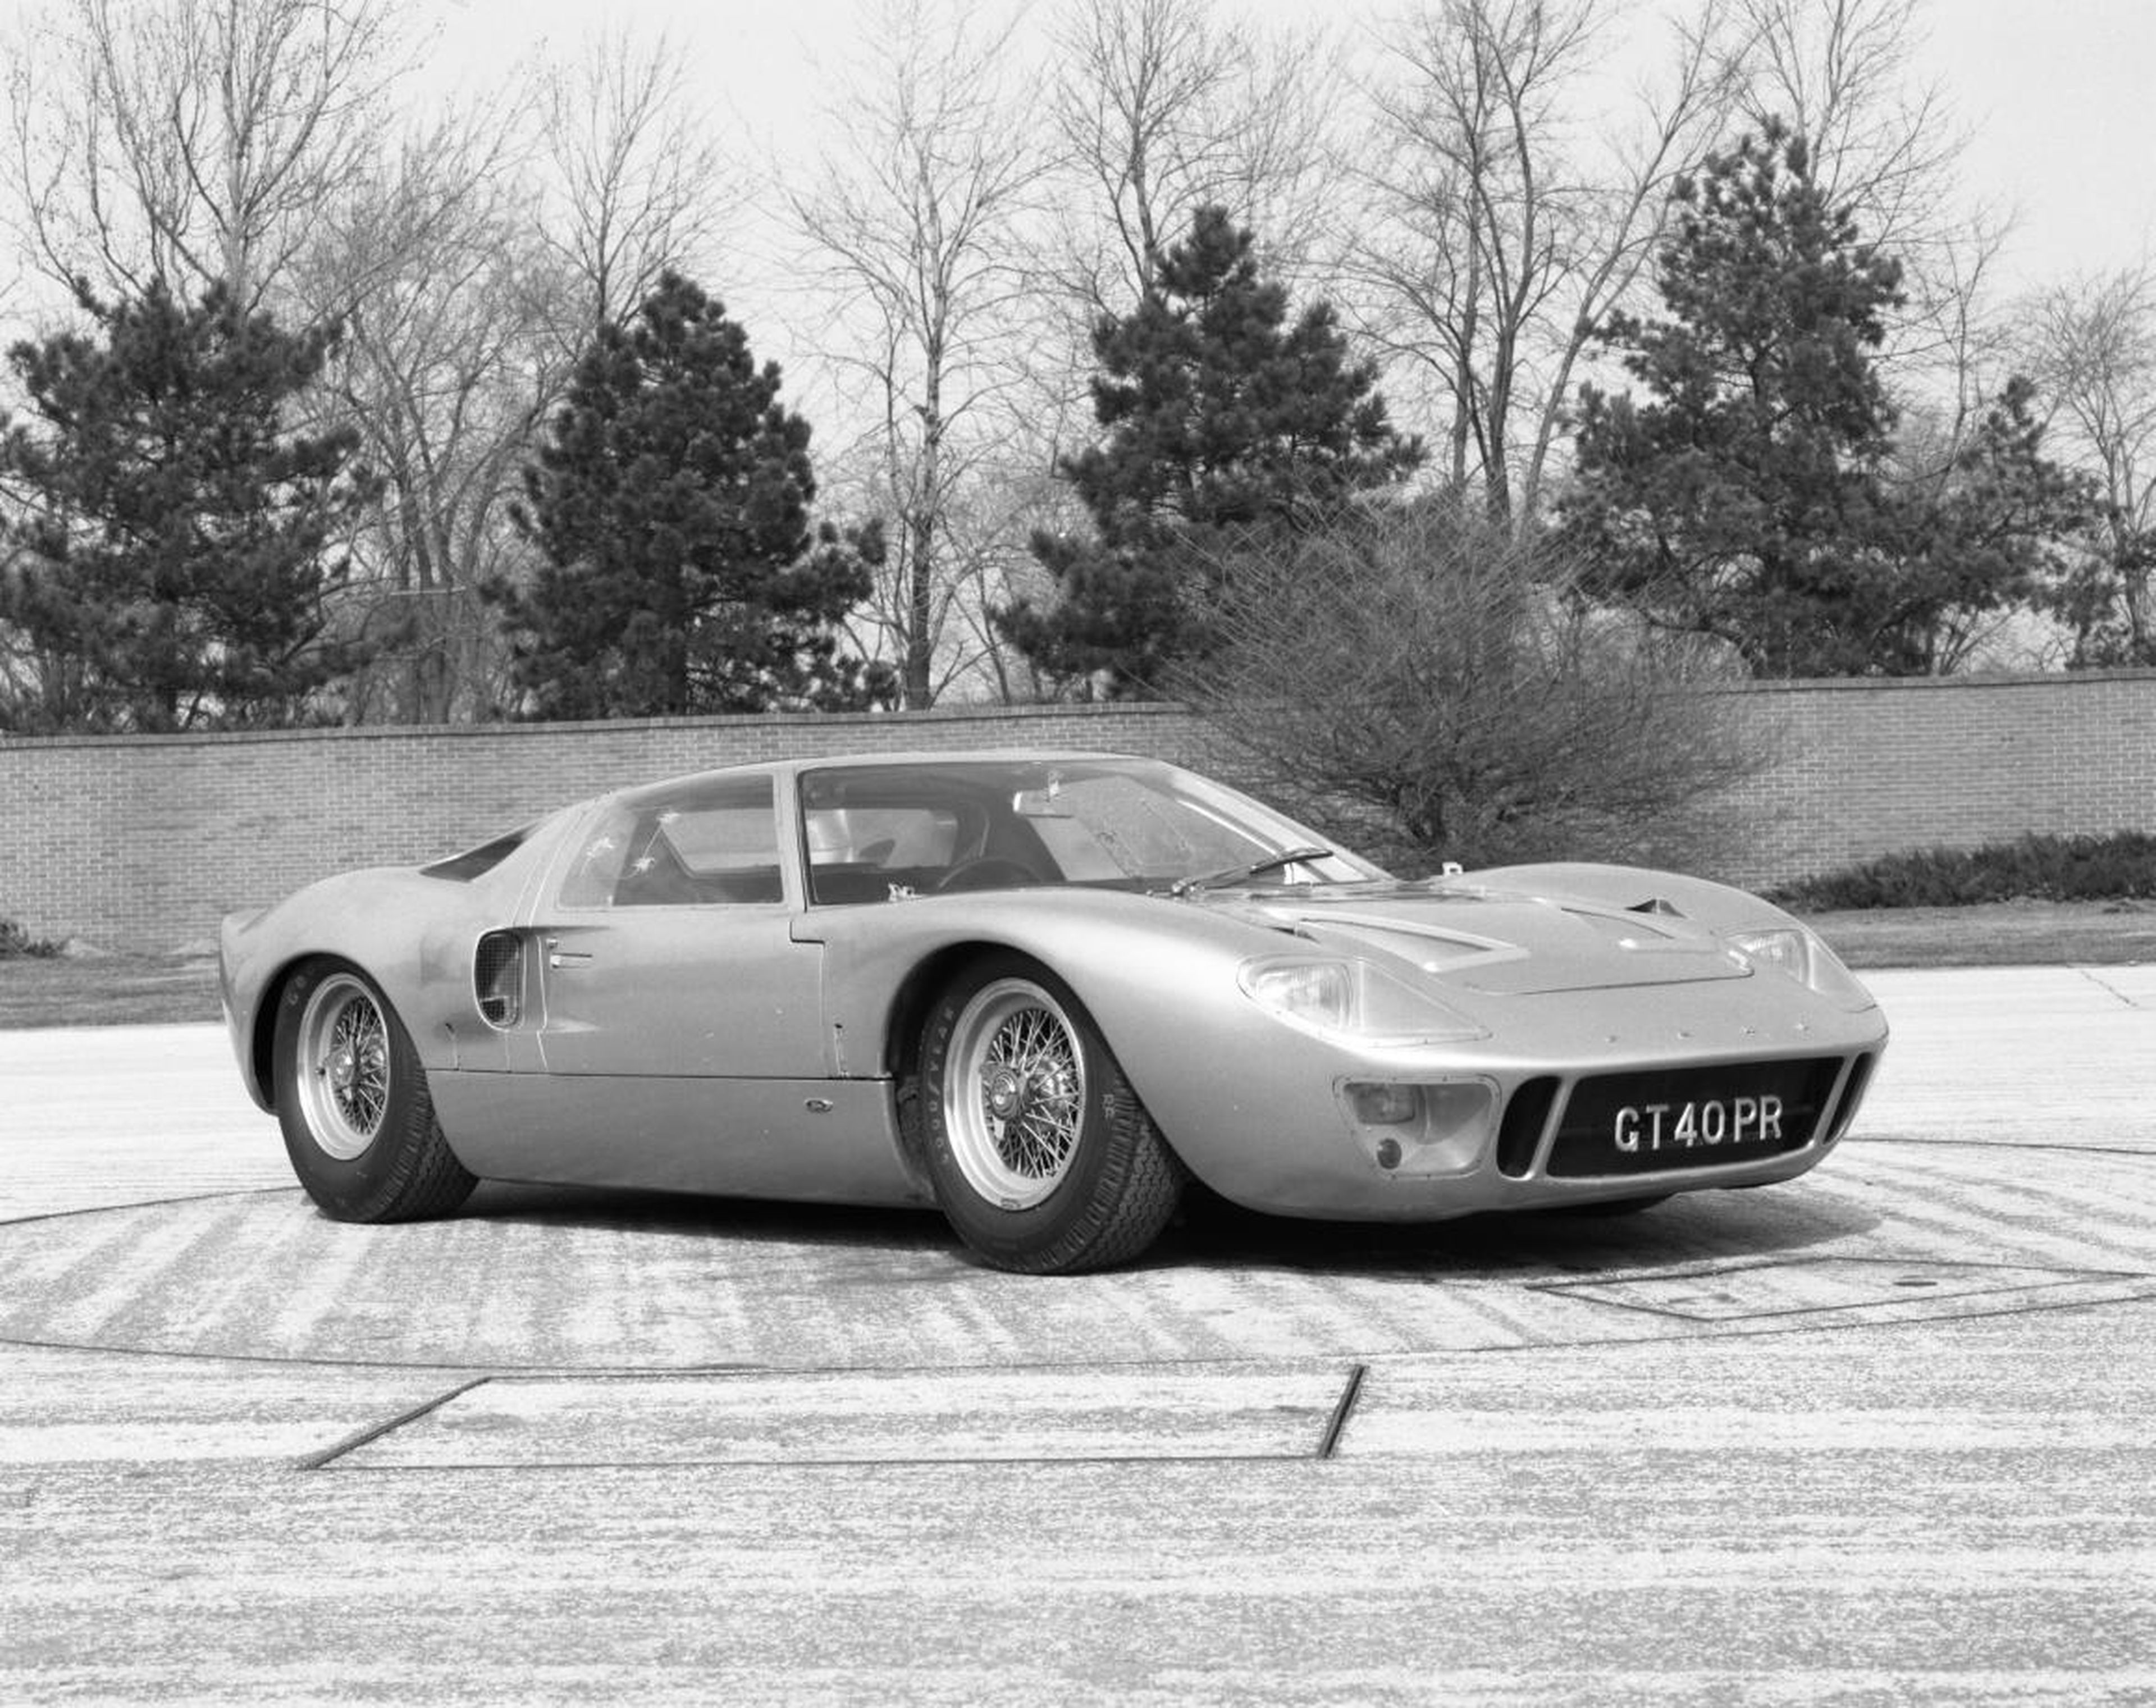 By 1966, Ford's challenger for Ferrari's cars was ready. The legendary GT40 was set to race at Le Mans.